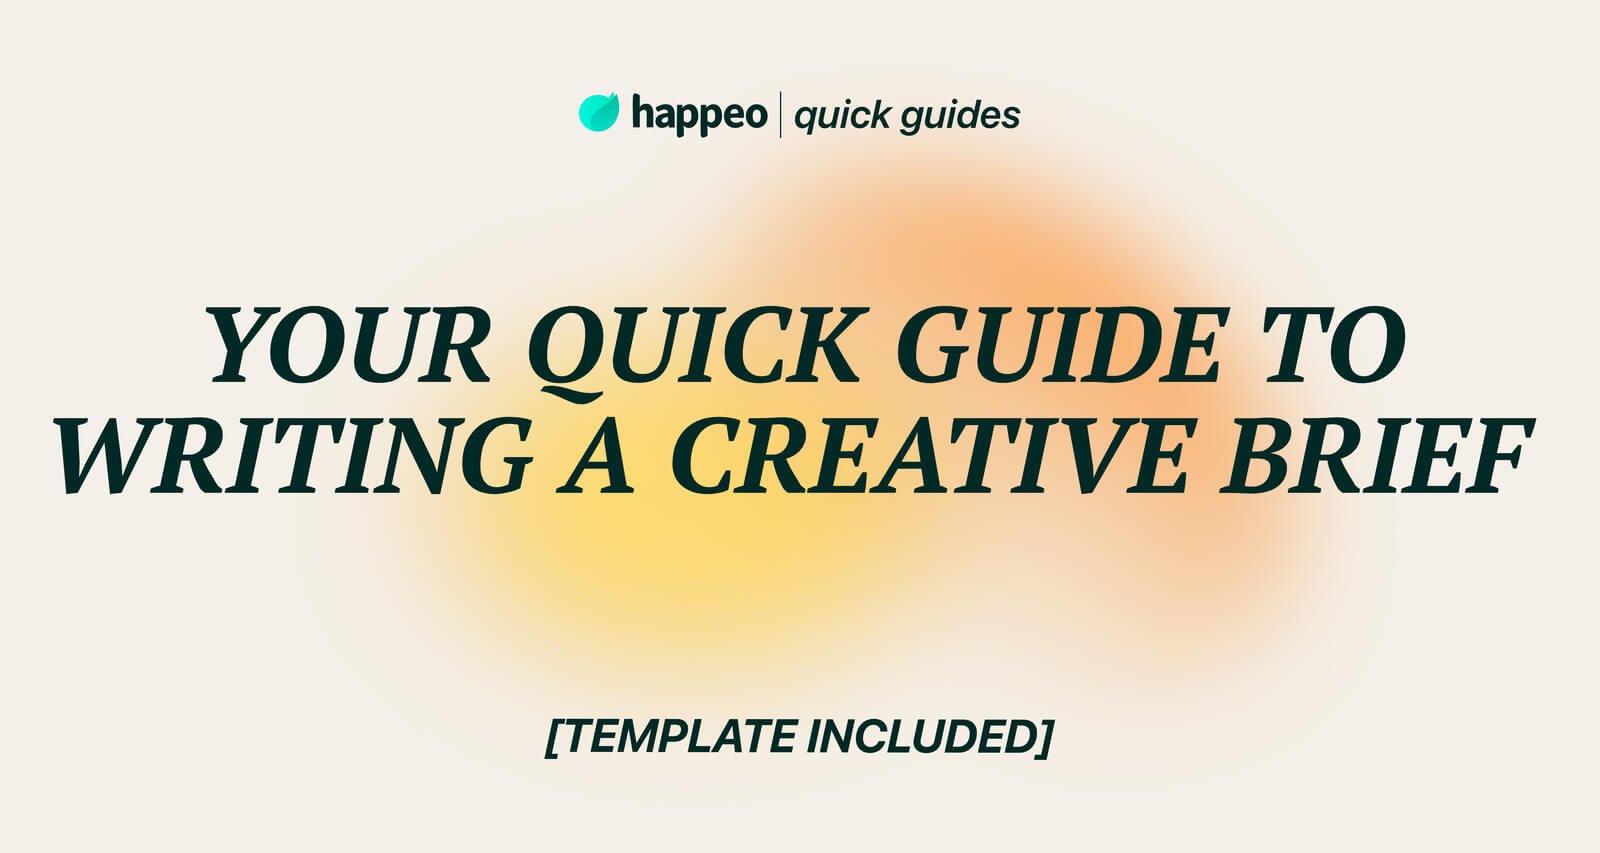 Your quick guide to writing a creative brief [incl. template]